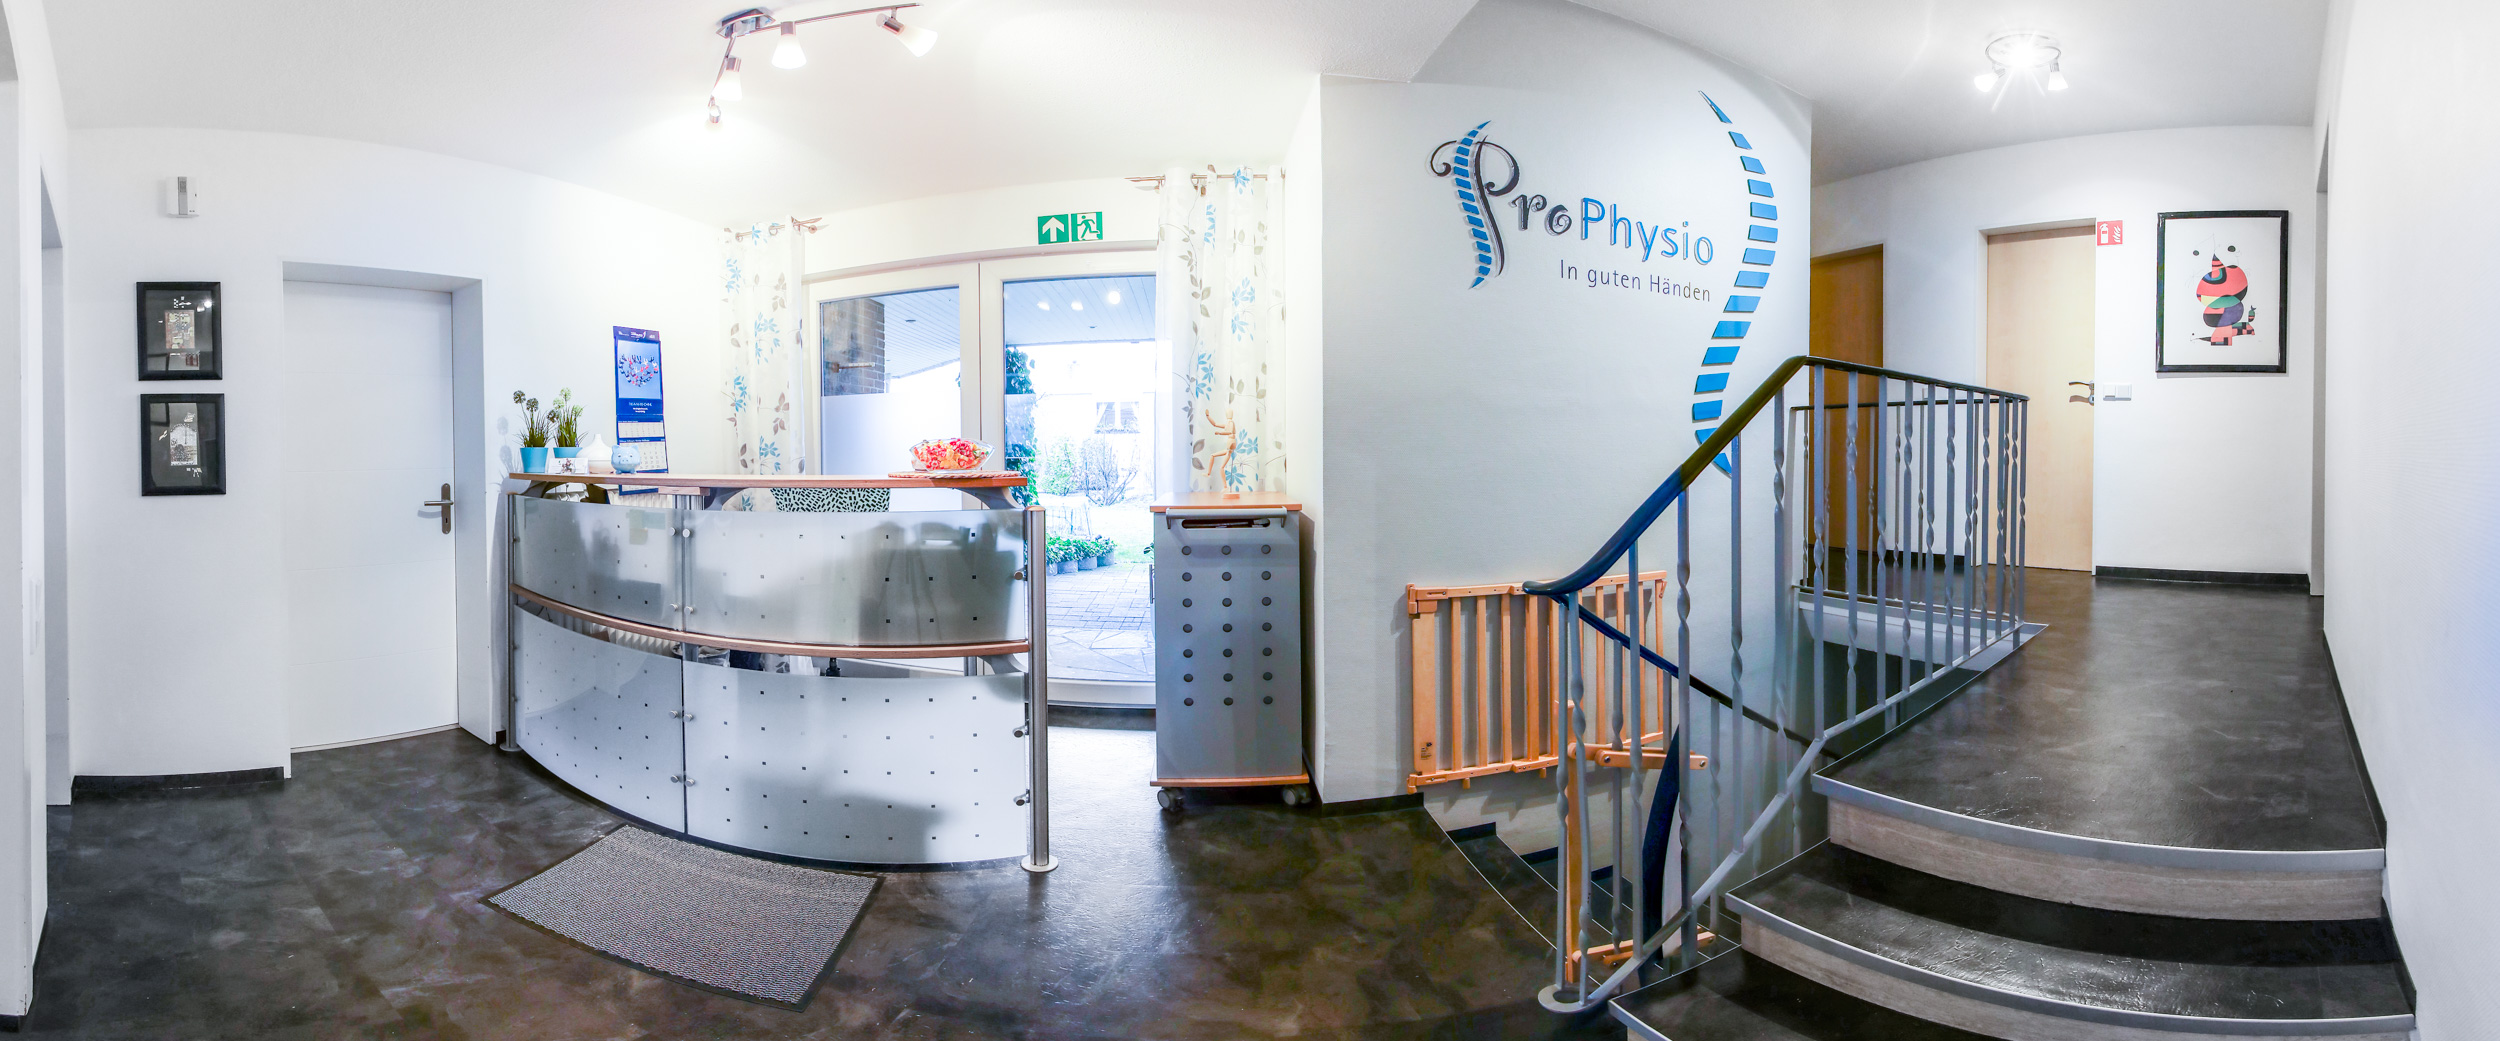 ProPhysio Physiotherapie Hamm Empfang Praxis